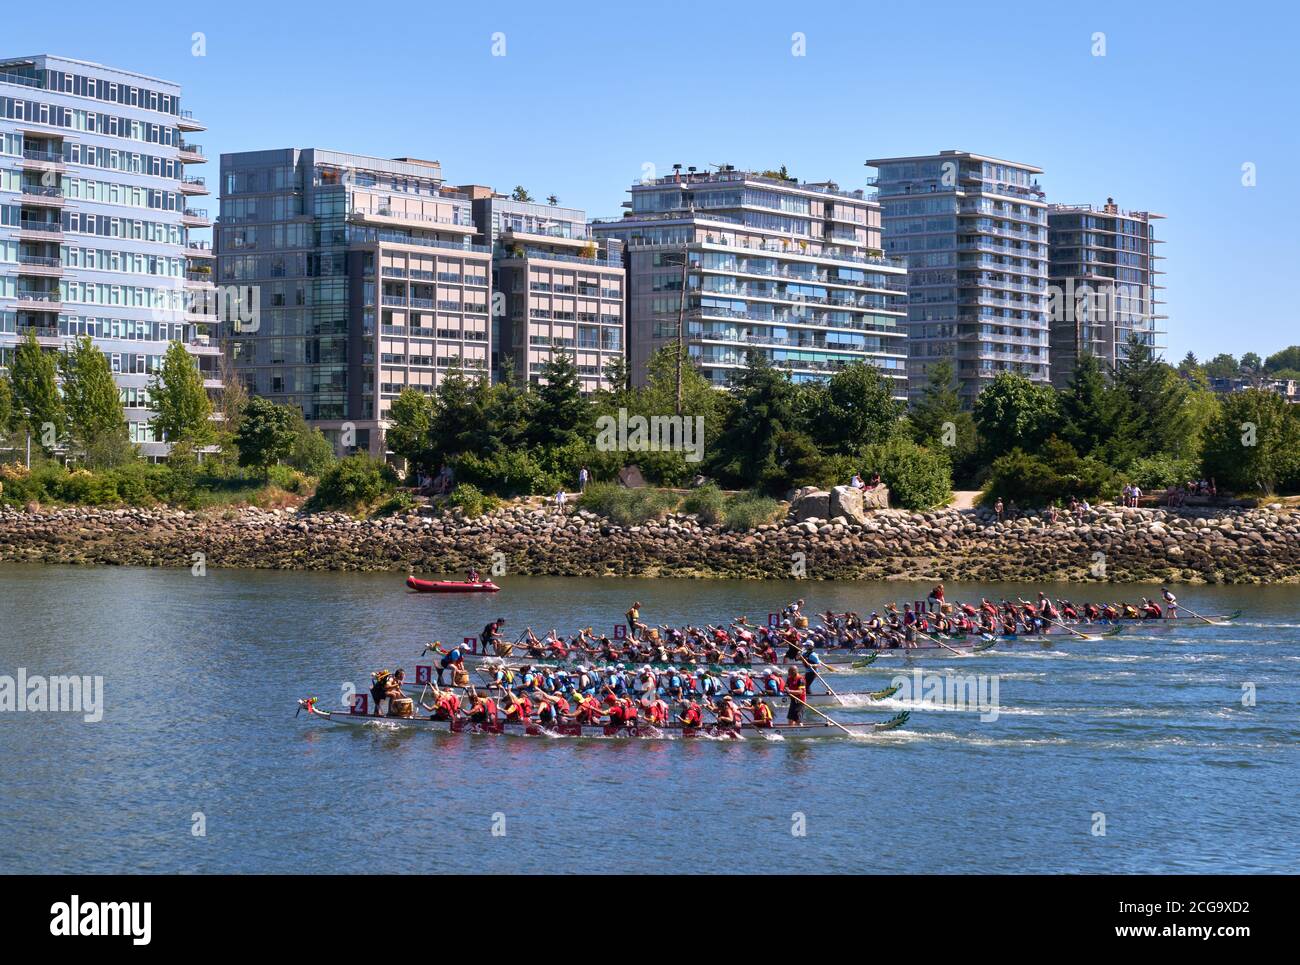 Vancouver, British Columbia, Canada – June 24, 2017. Vancouver Dragon Boat Races. Dragonboat teams race on the calm water of False Creek. British Colu Stock Photo